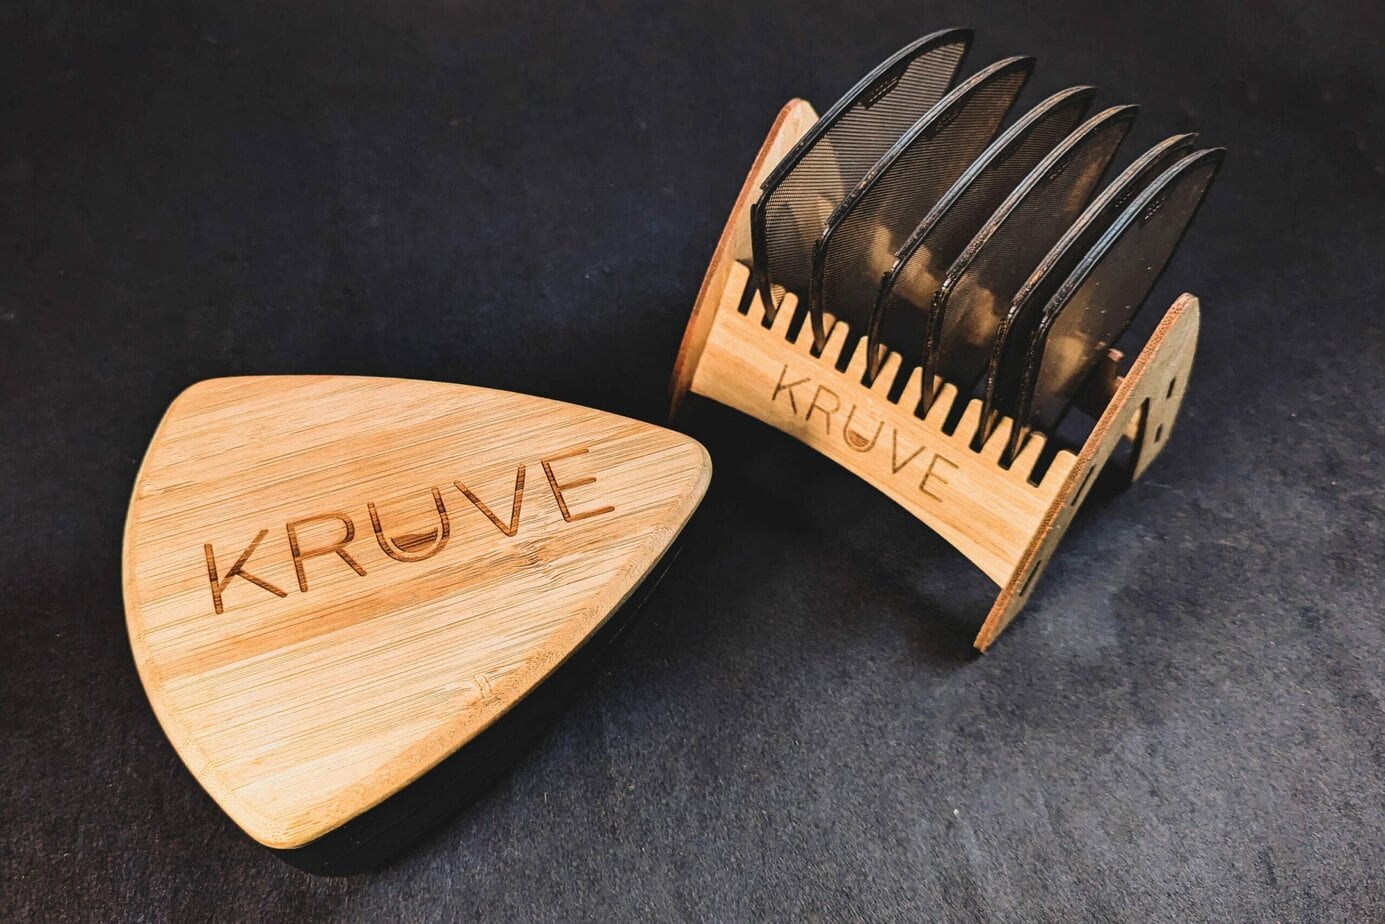 Kruve Sifter next to blade stand